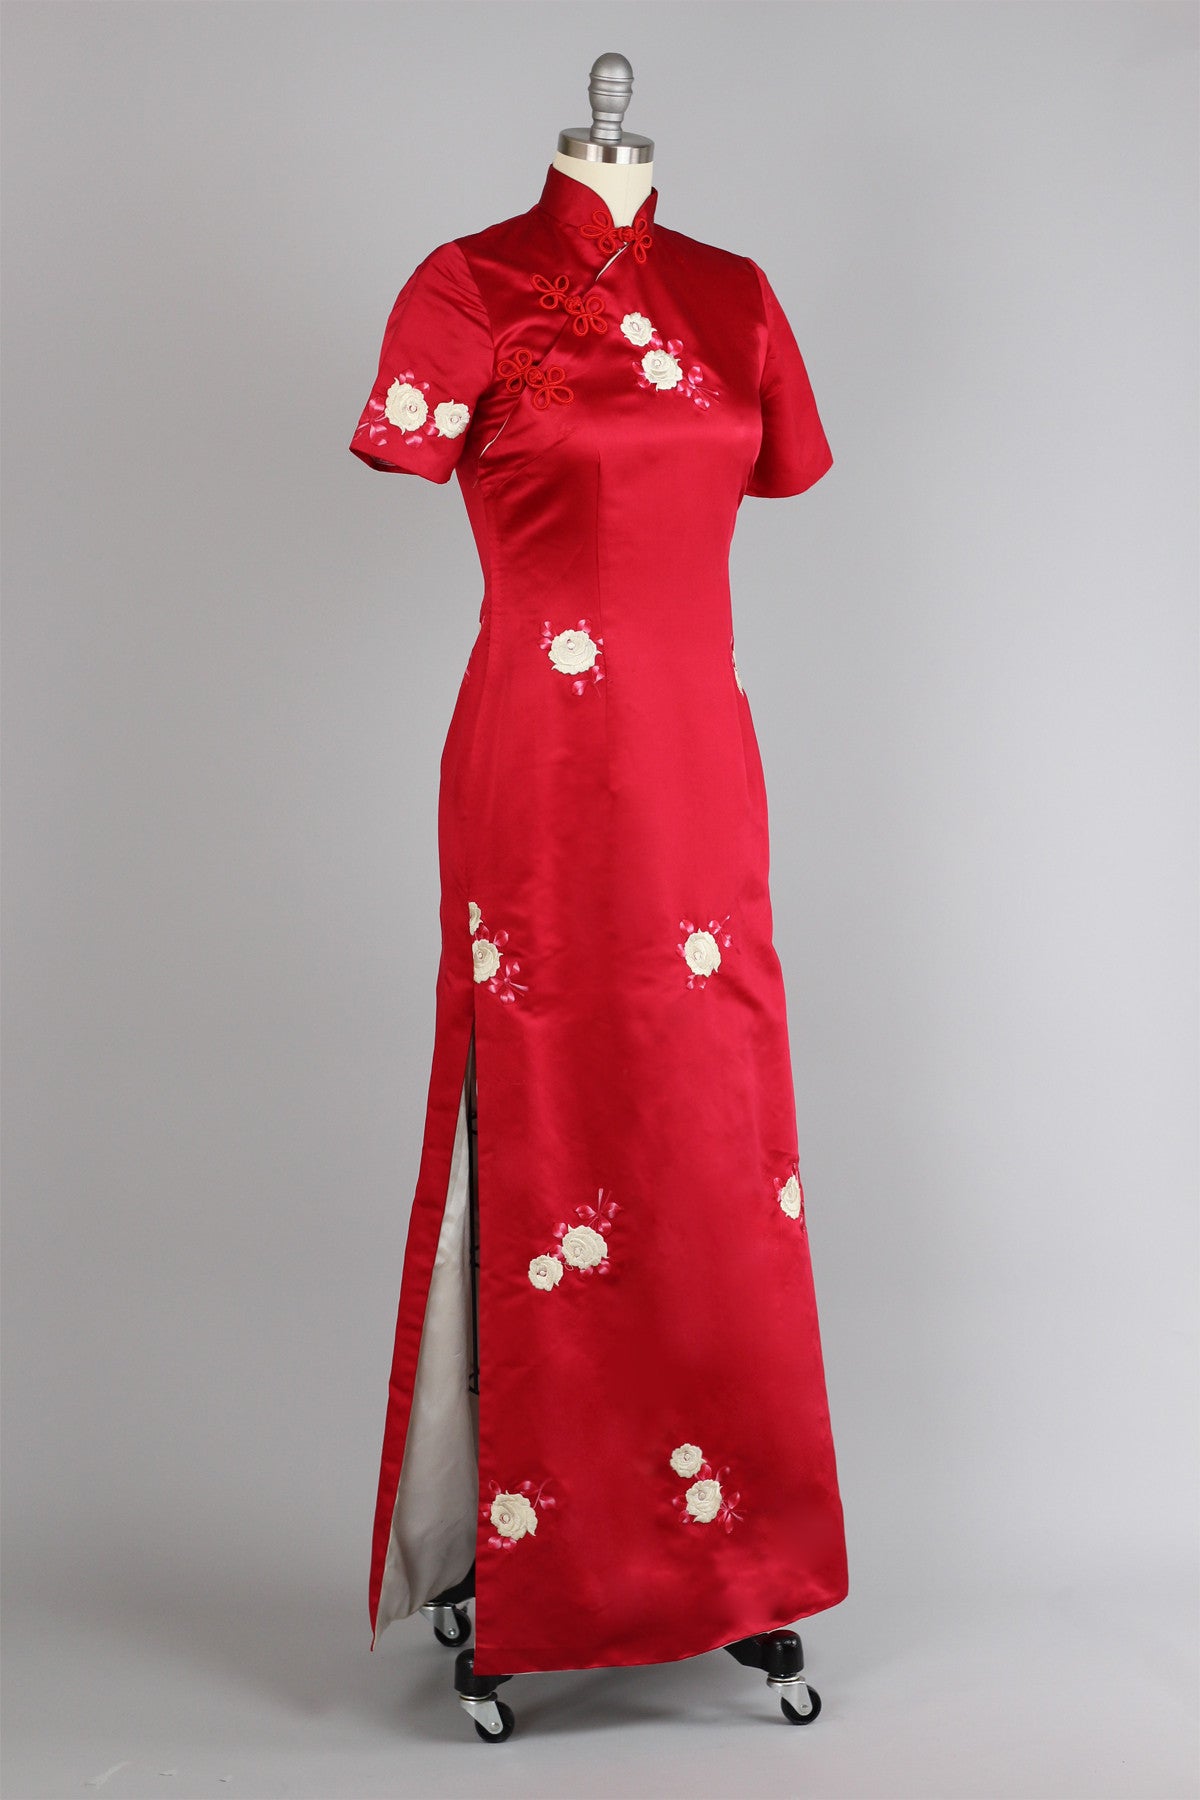 Rare 1960s Vintage Red Satin Full Length Cheongsam with Embroidered Roses